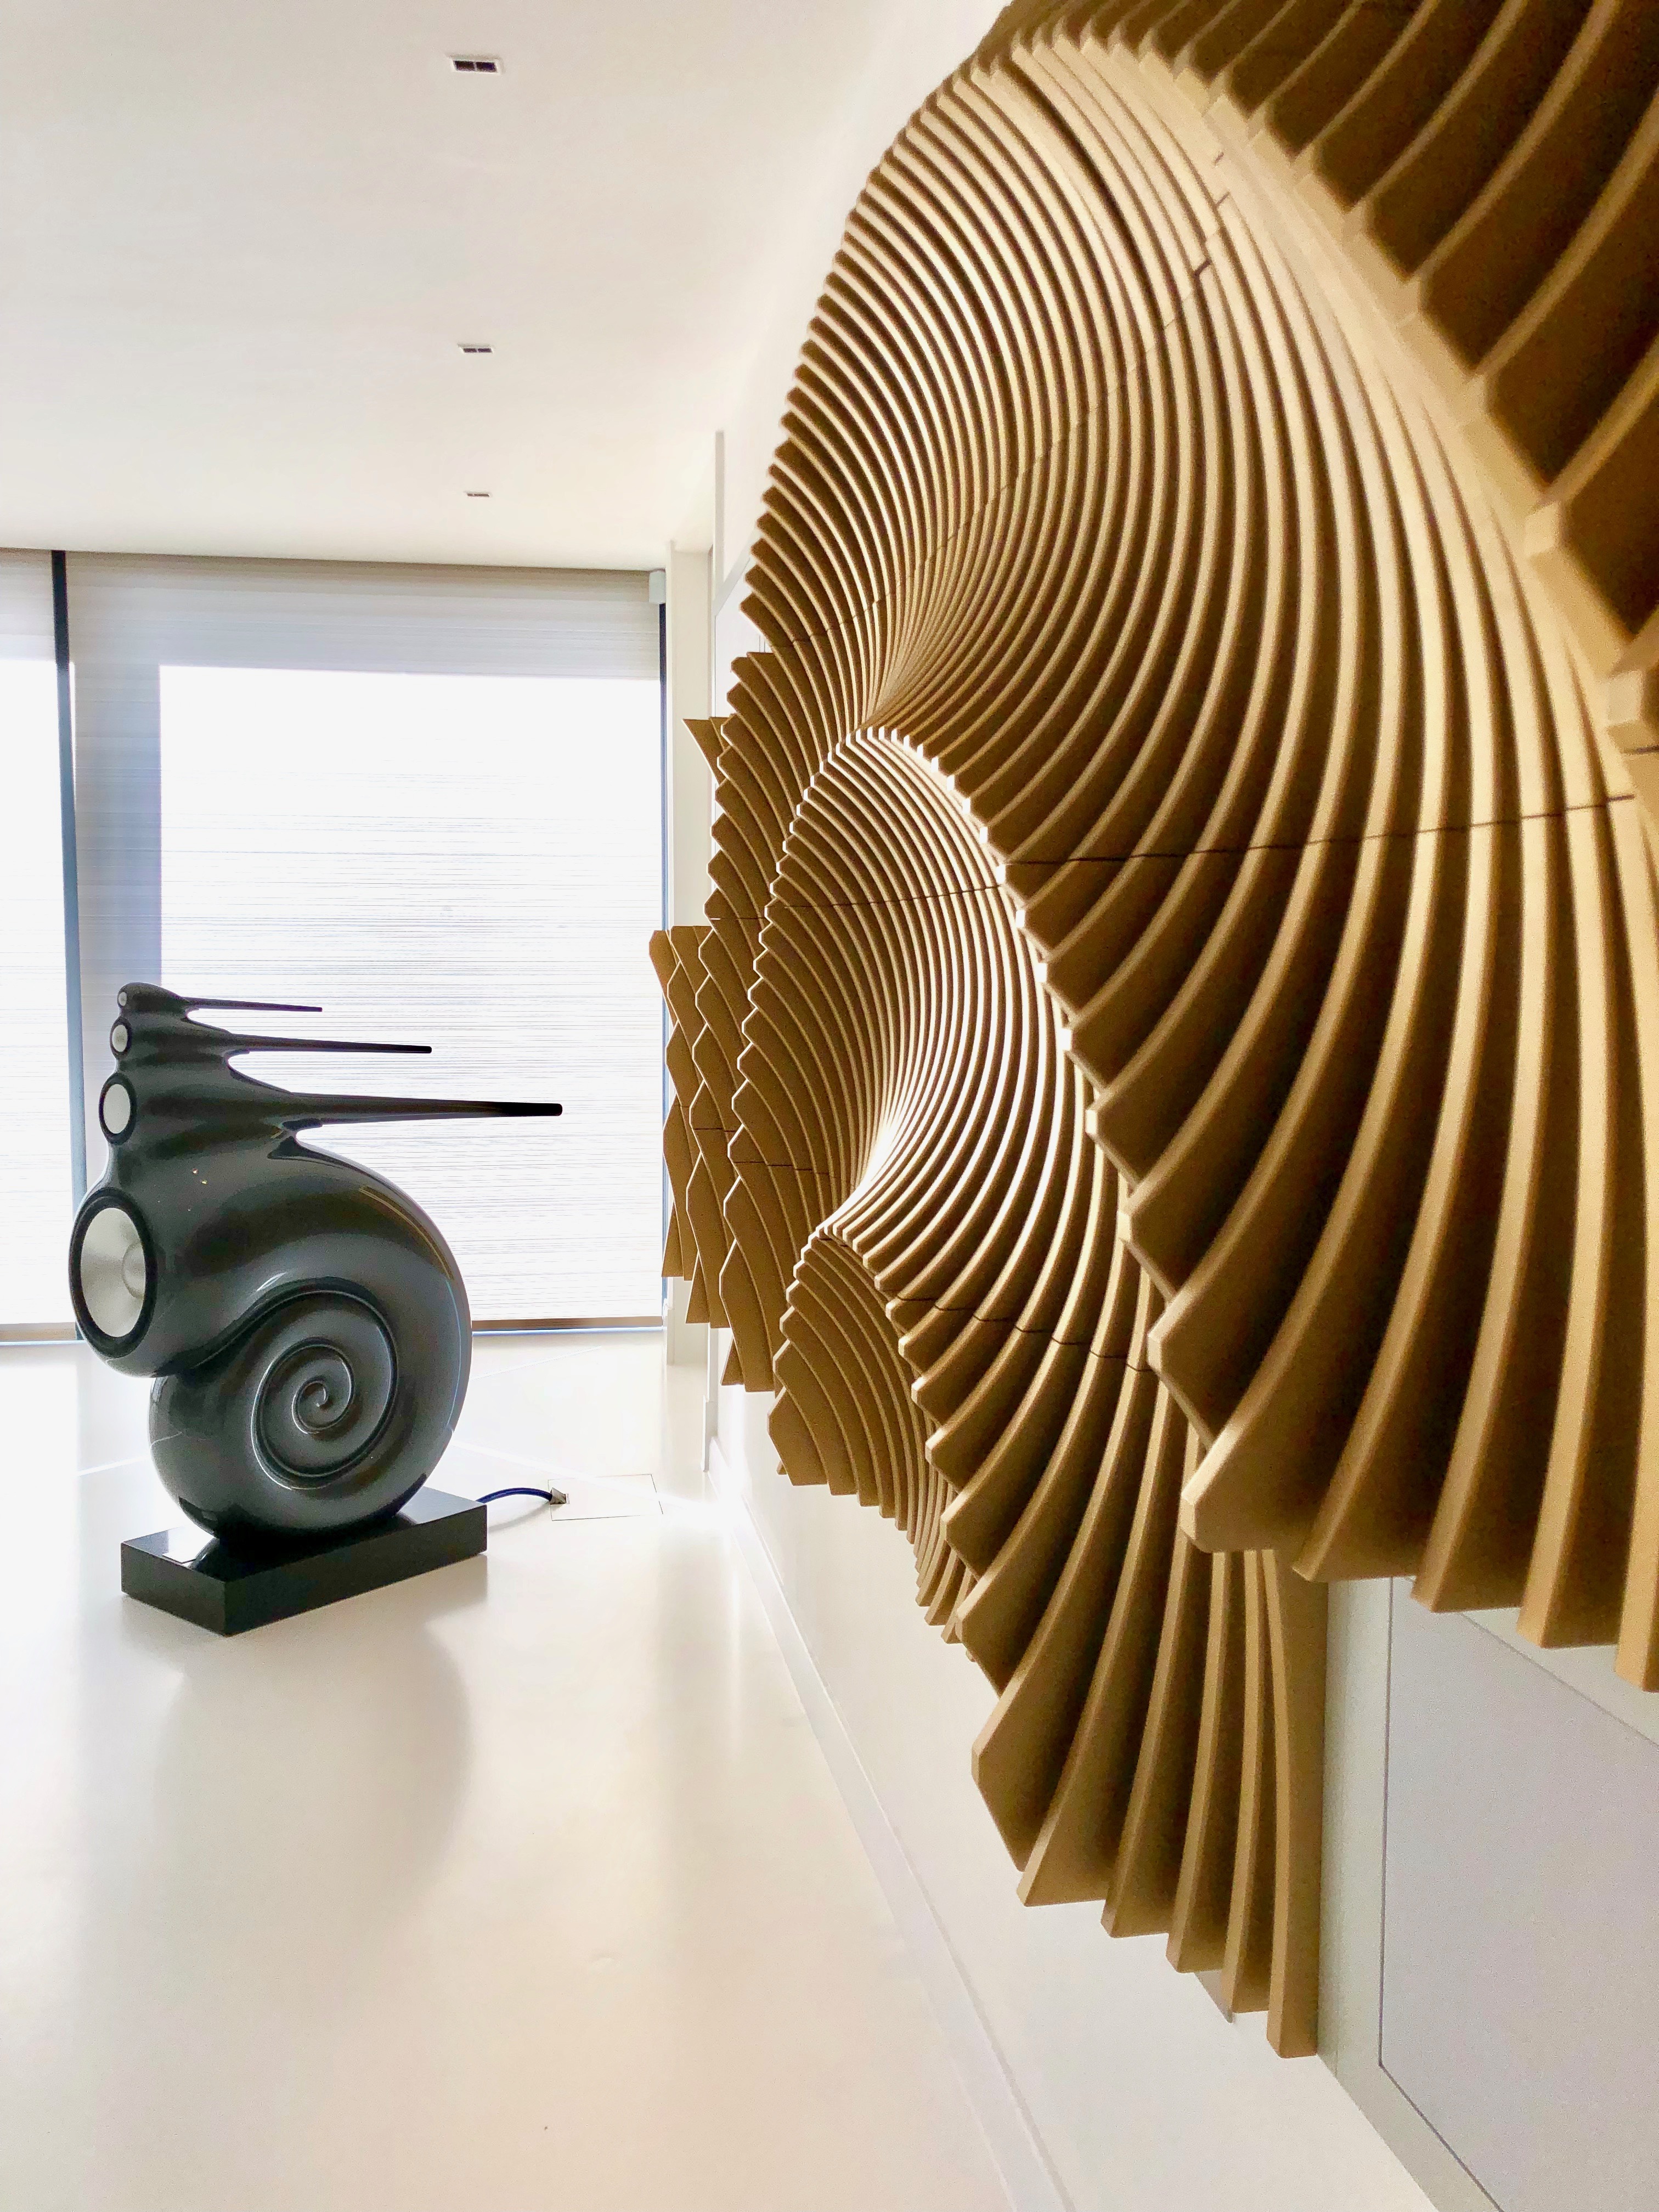 Image shows a loudspeaker with ammonite shaped acoustic treatment.